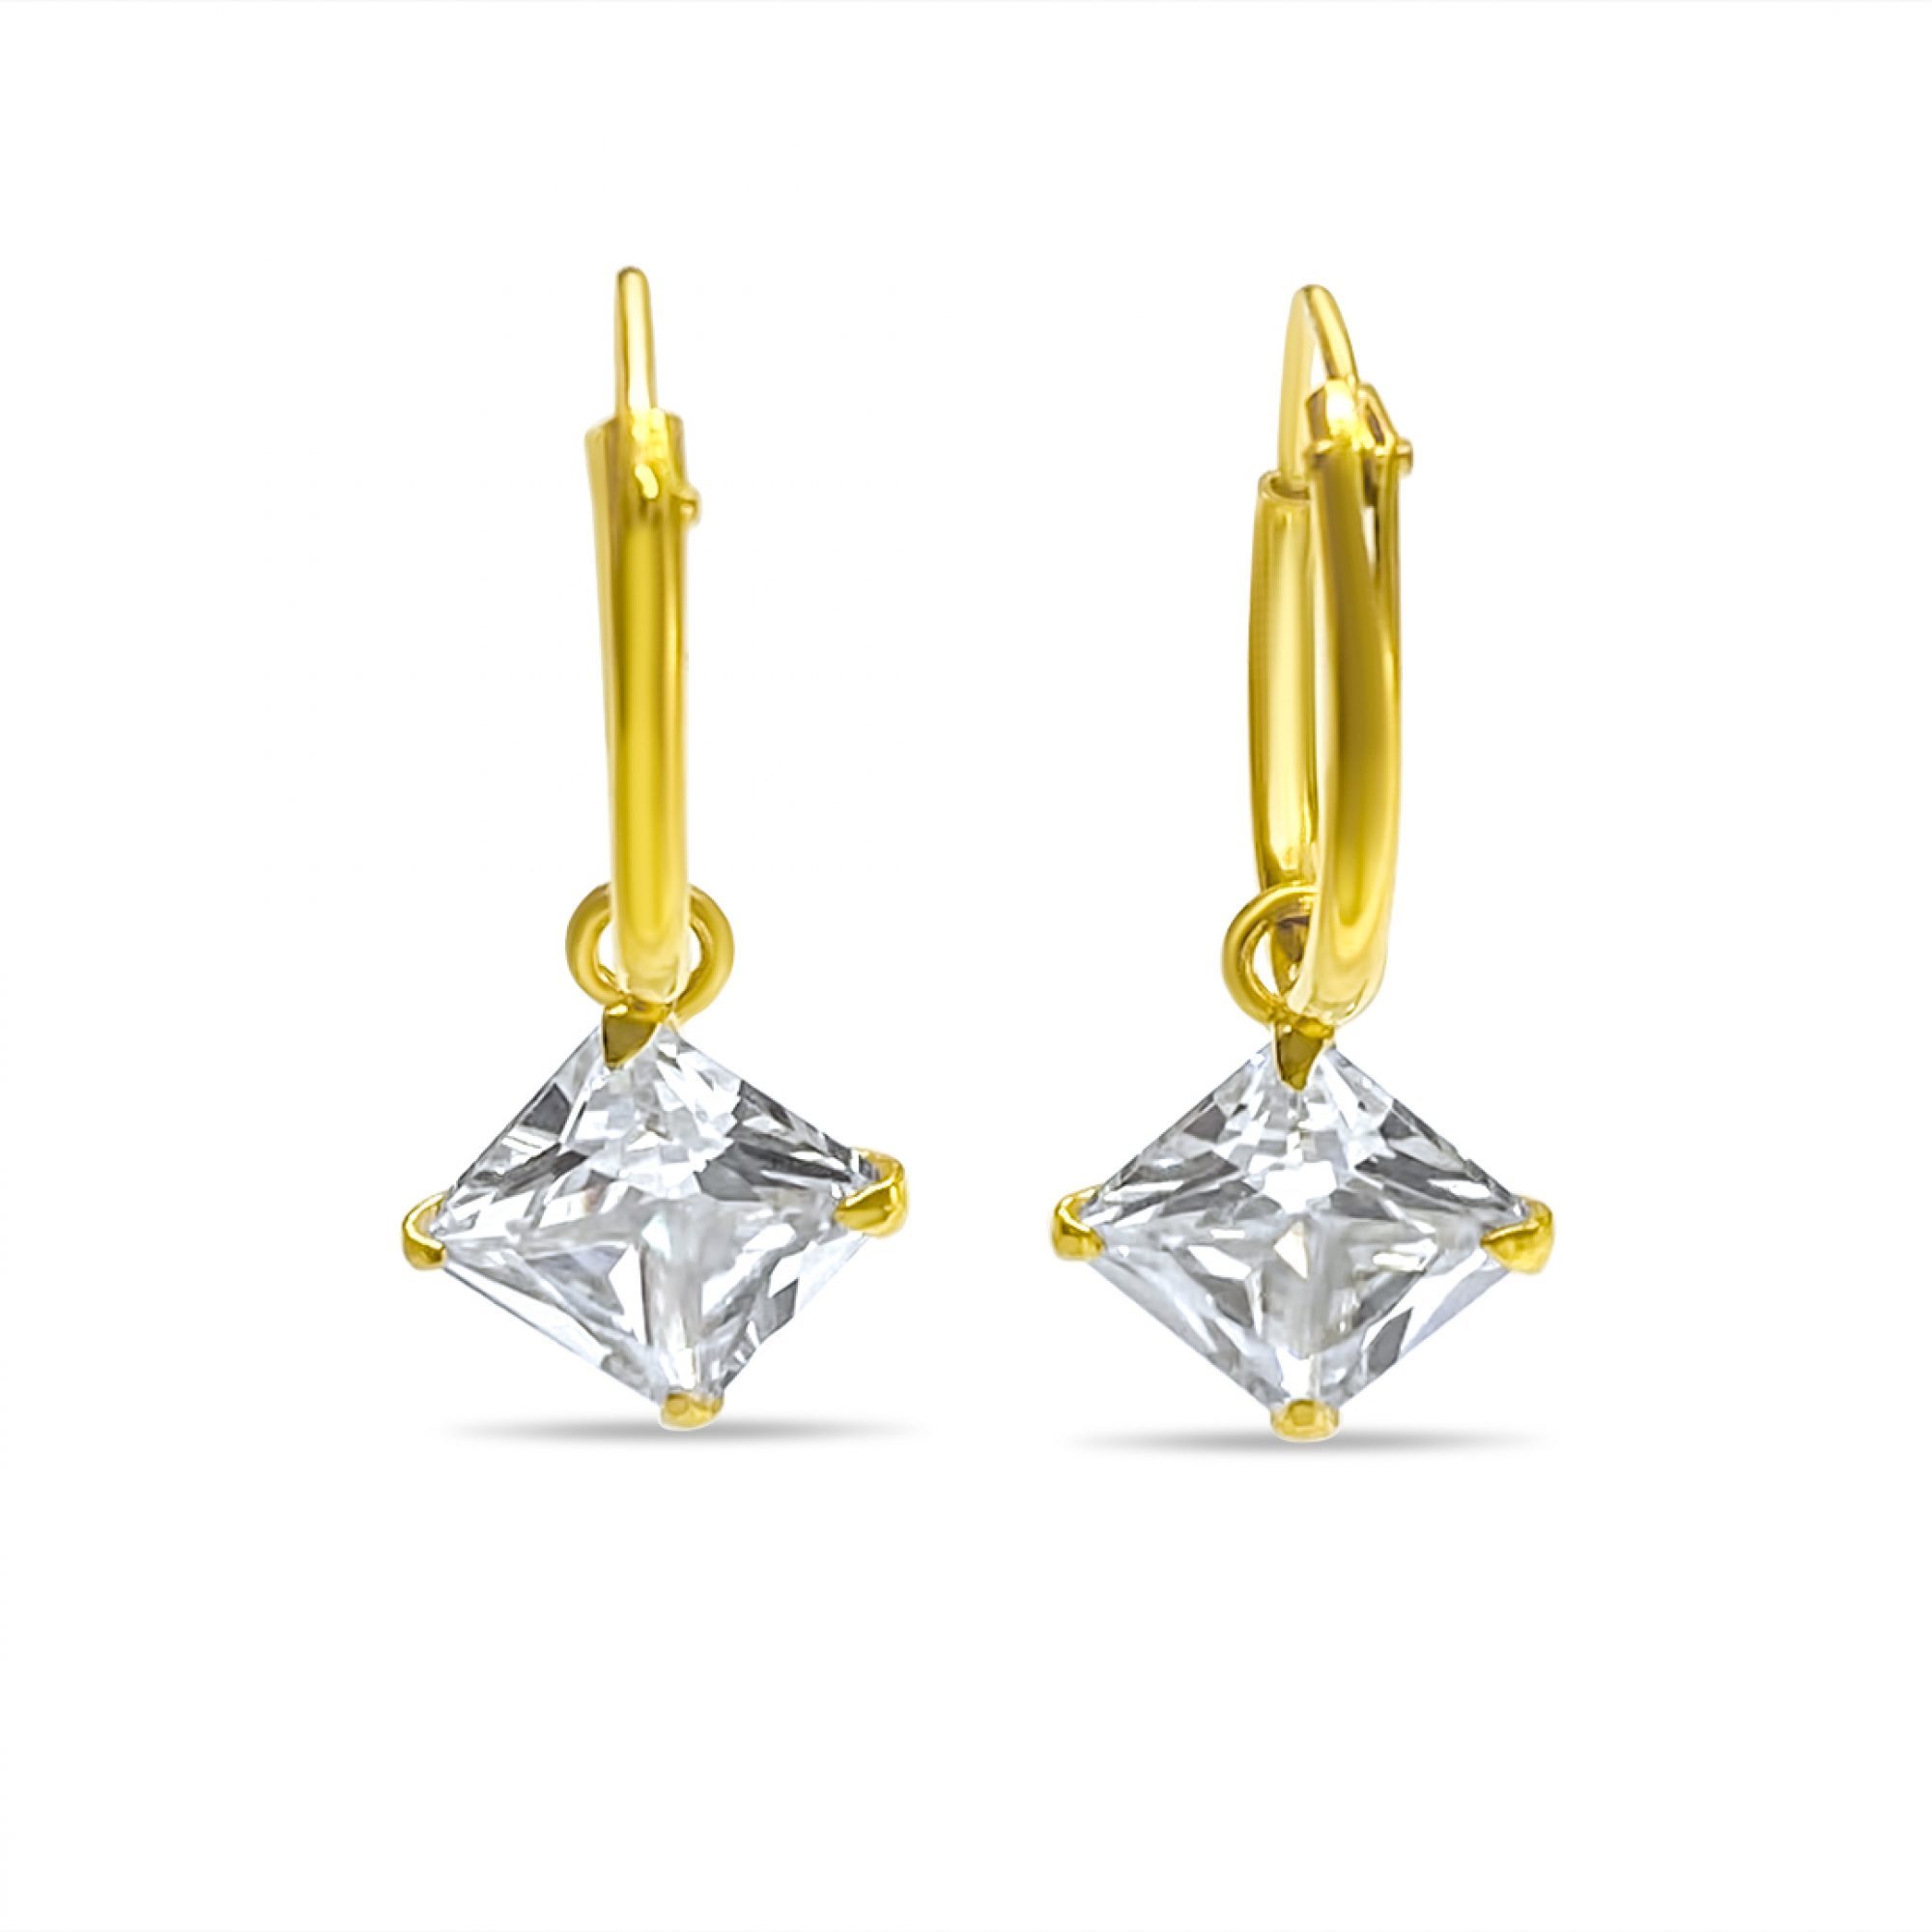 Gold plated earrings with dangle zircon stone